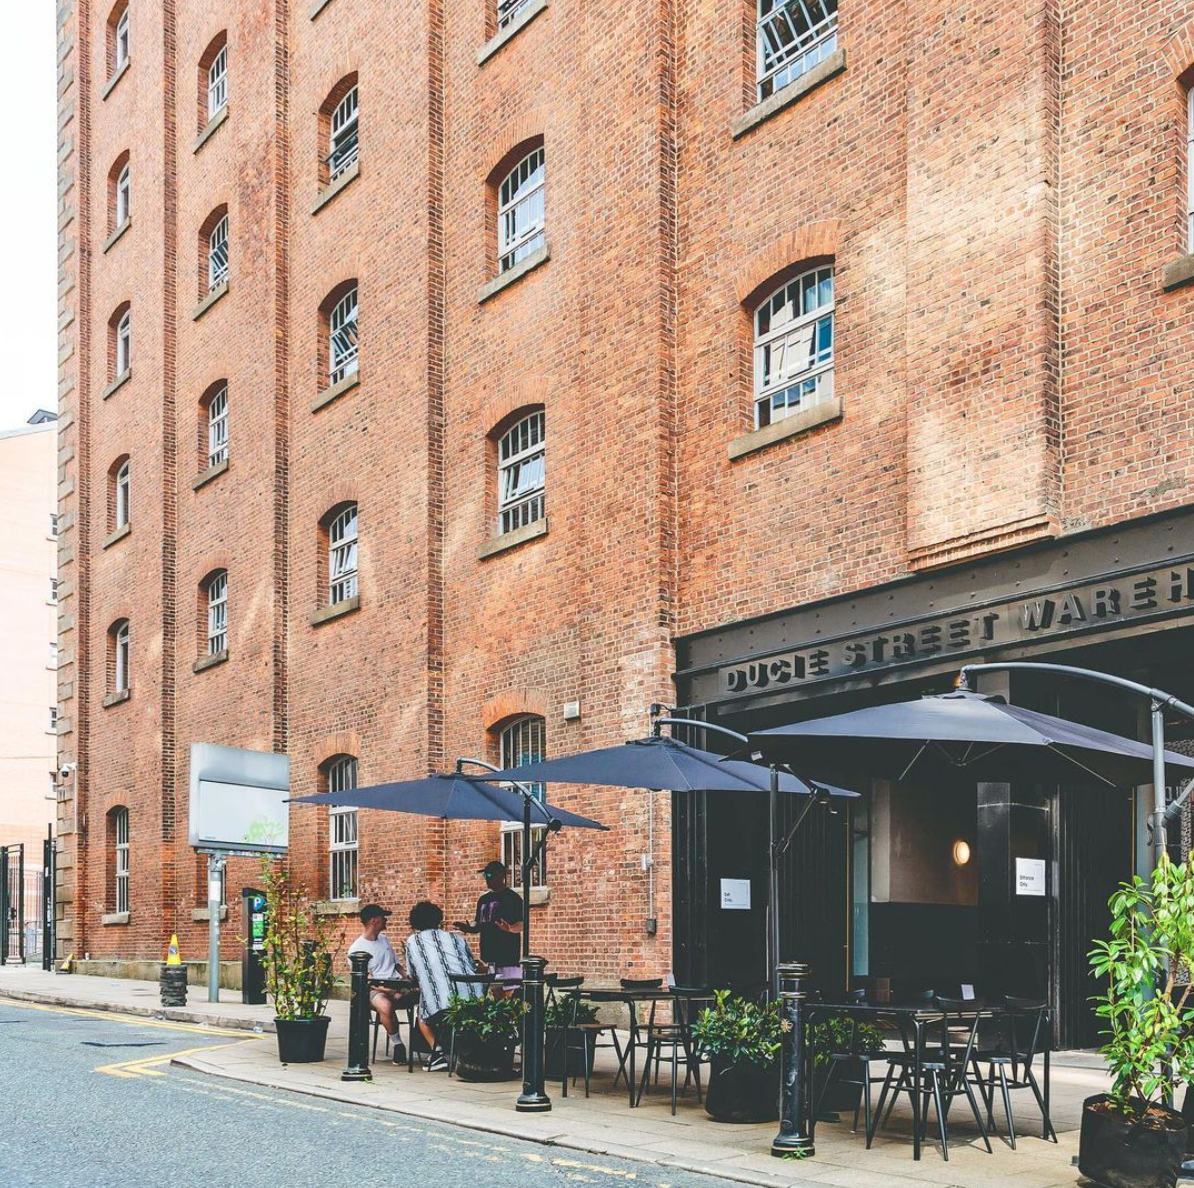 A brand new &#8216;all day dining and drinking&#8217; outdoor terrace is opening at Ducie Street Warehouse, The Manc